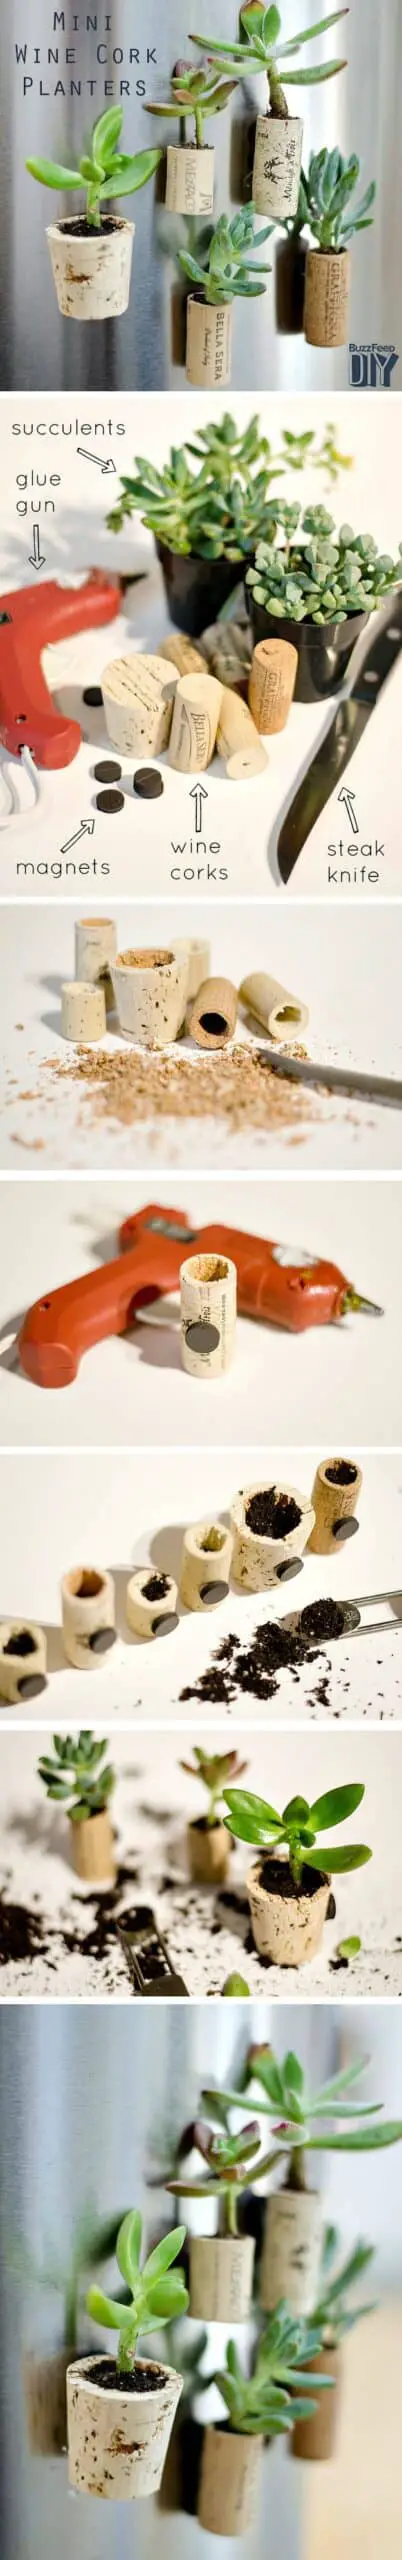 Diy: Tiny Planters From Upcycled Wine Corks 40 - Flowers & Plants